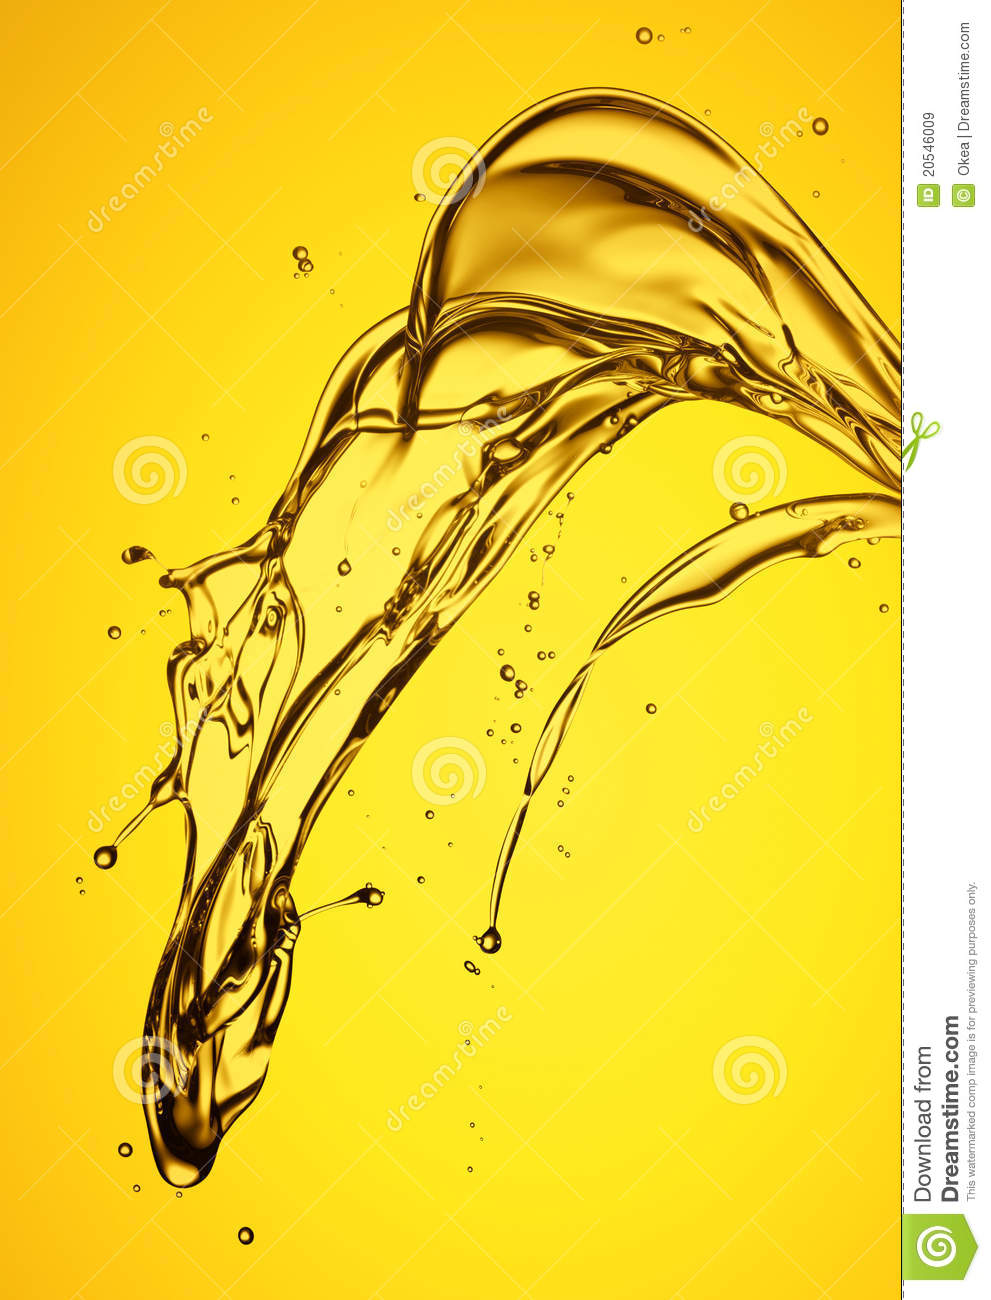 Gold Color Oil Splashing Against Yellow Background